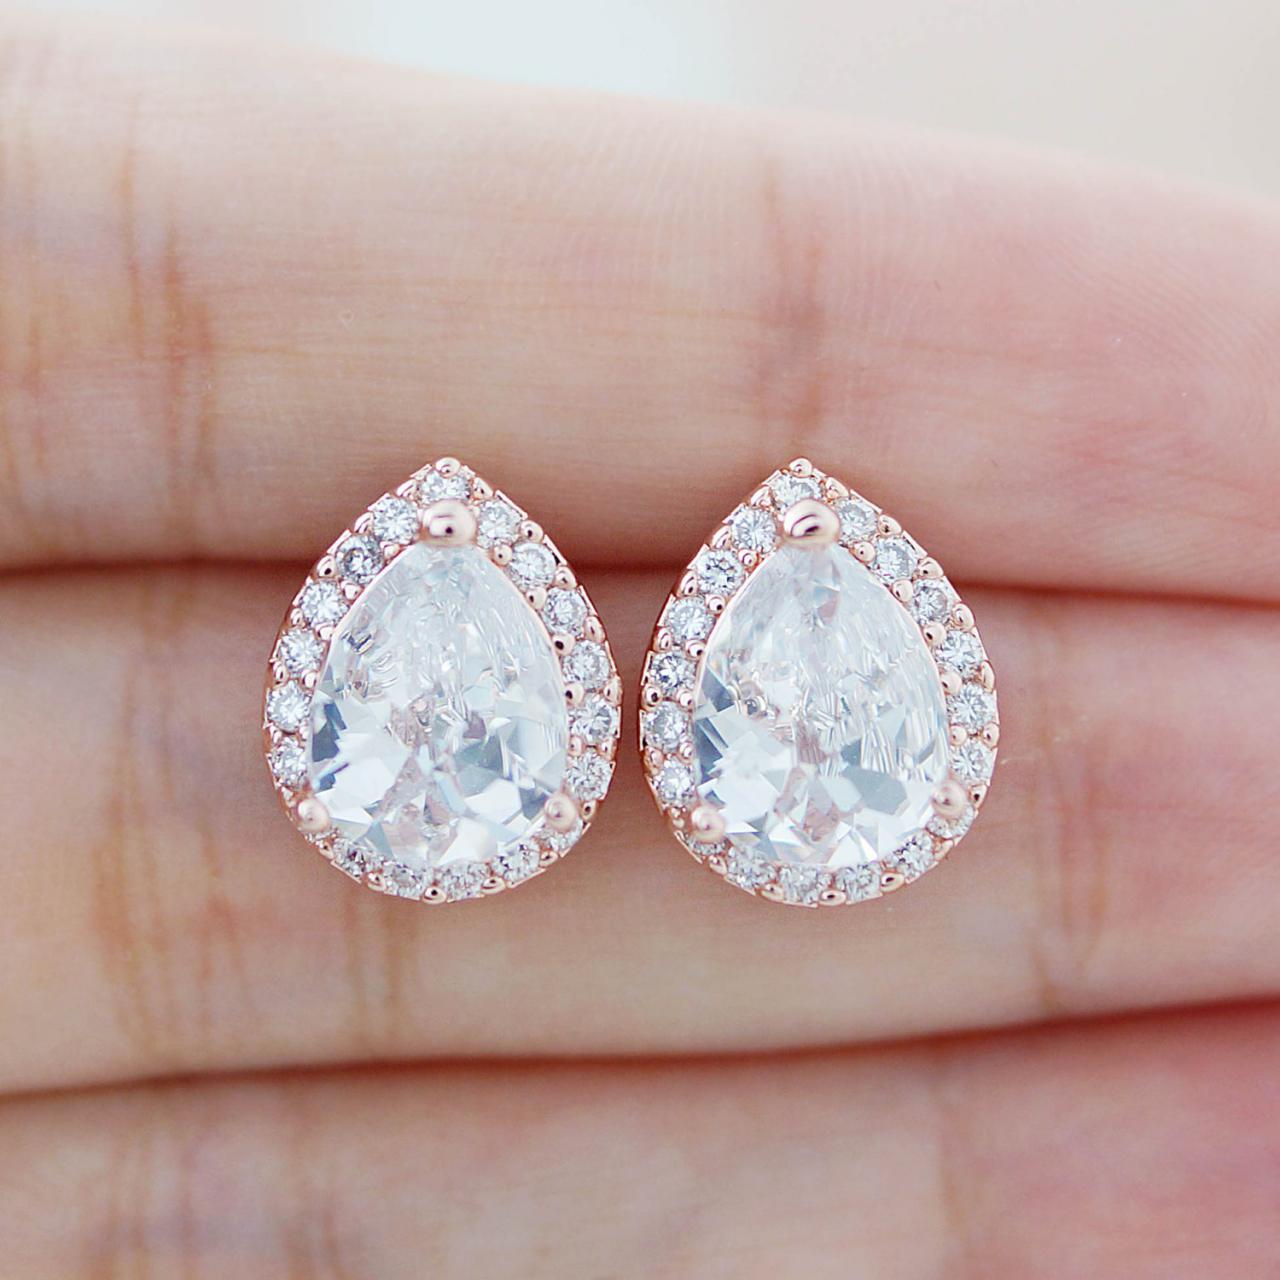 Wedding Jewelry Bridal Jewelry Bridal Earrings Bridesmaid Gift Bridesmaid Jewelry Rose Gold Plated Lux Cubic Zirconia Tear Drops Ear Posts